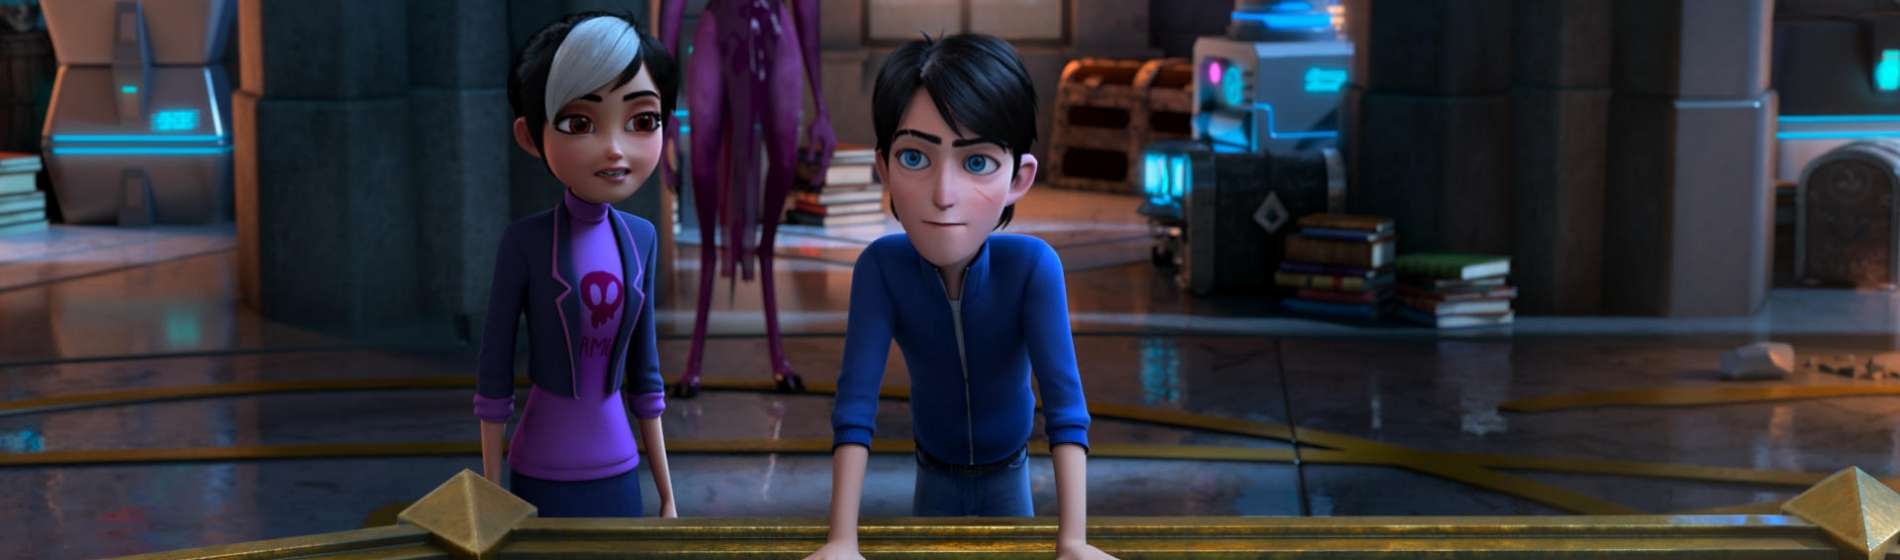 trollhunters-rise-of-the-titans-feature-image-june-15-2021 (1)